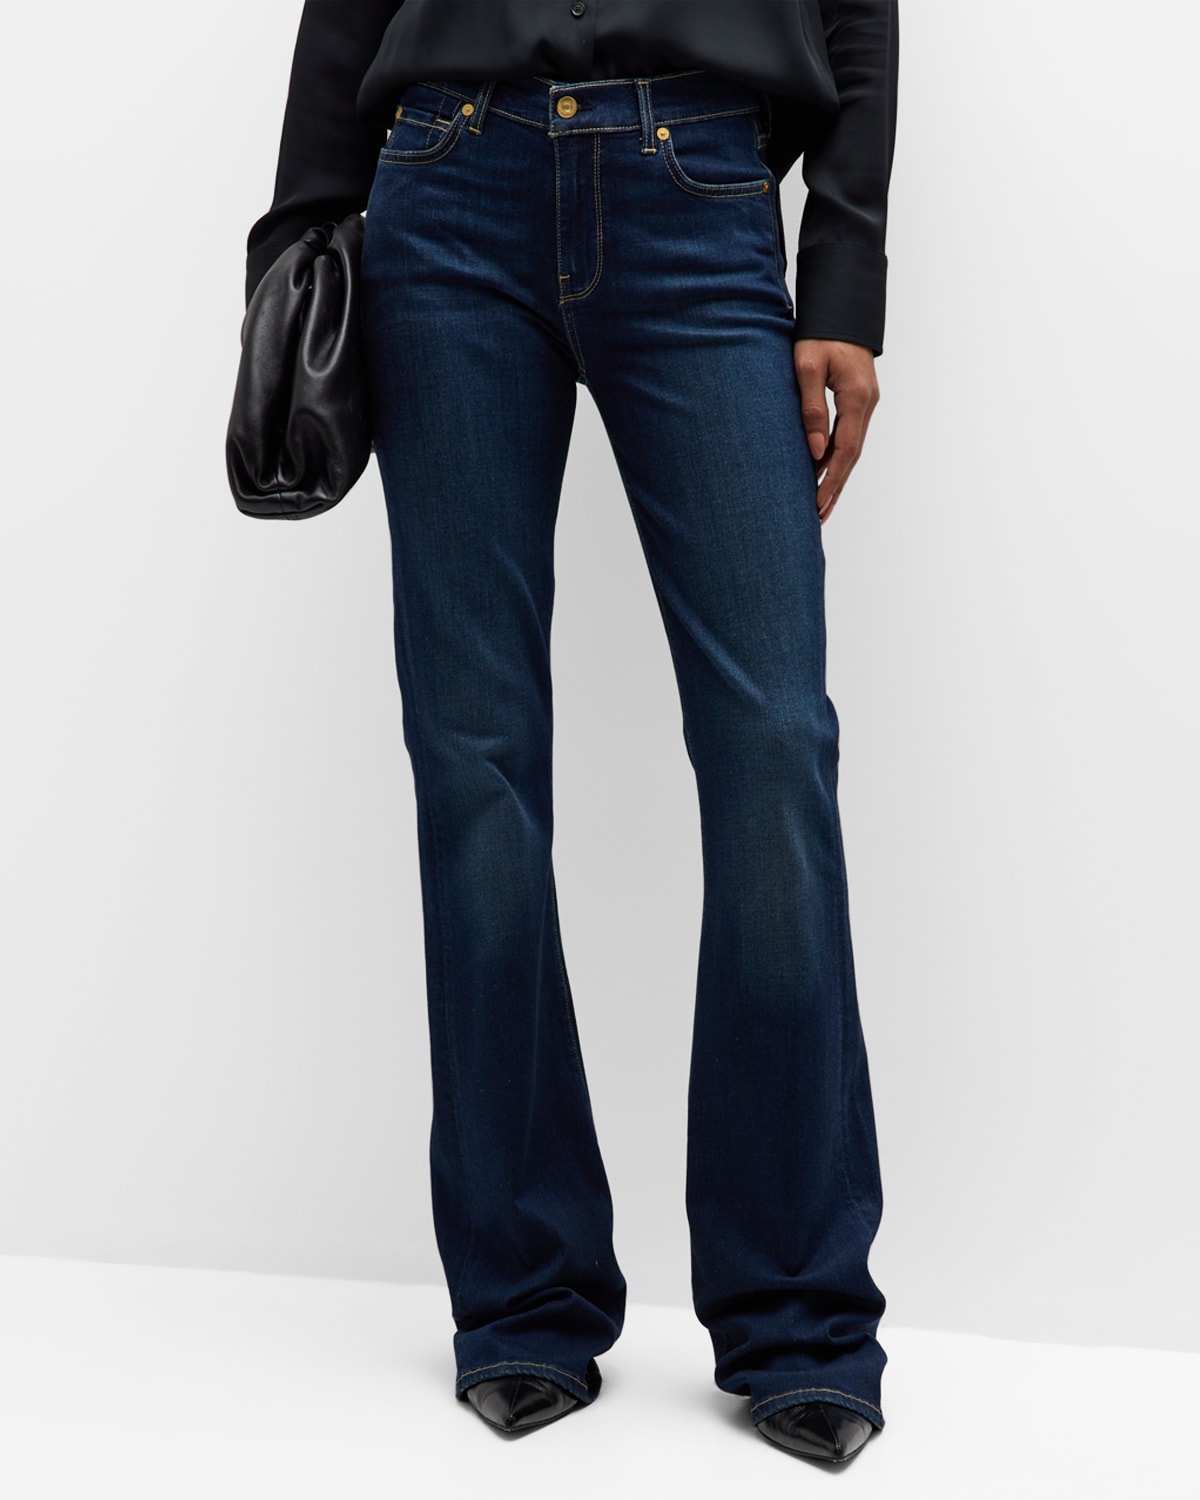 7 FOR ALL MANKIND ALI MID-RISE FLARE JEANS